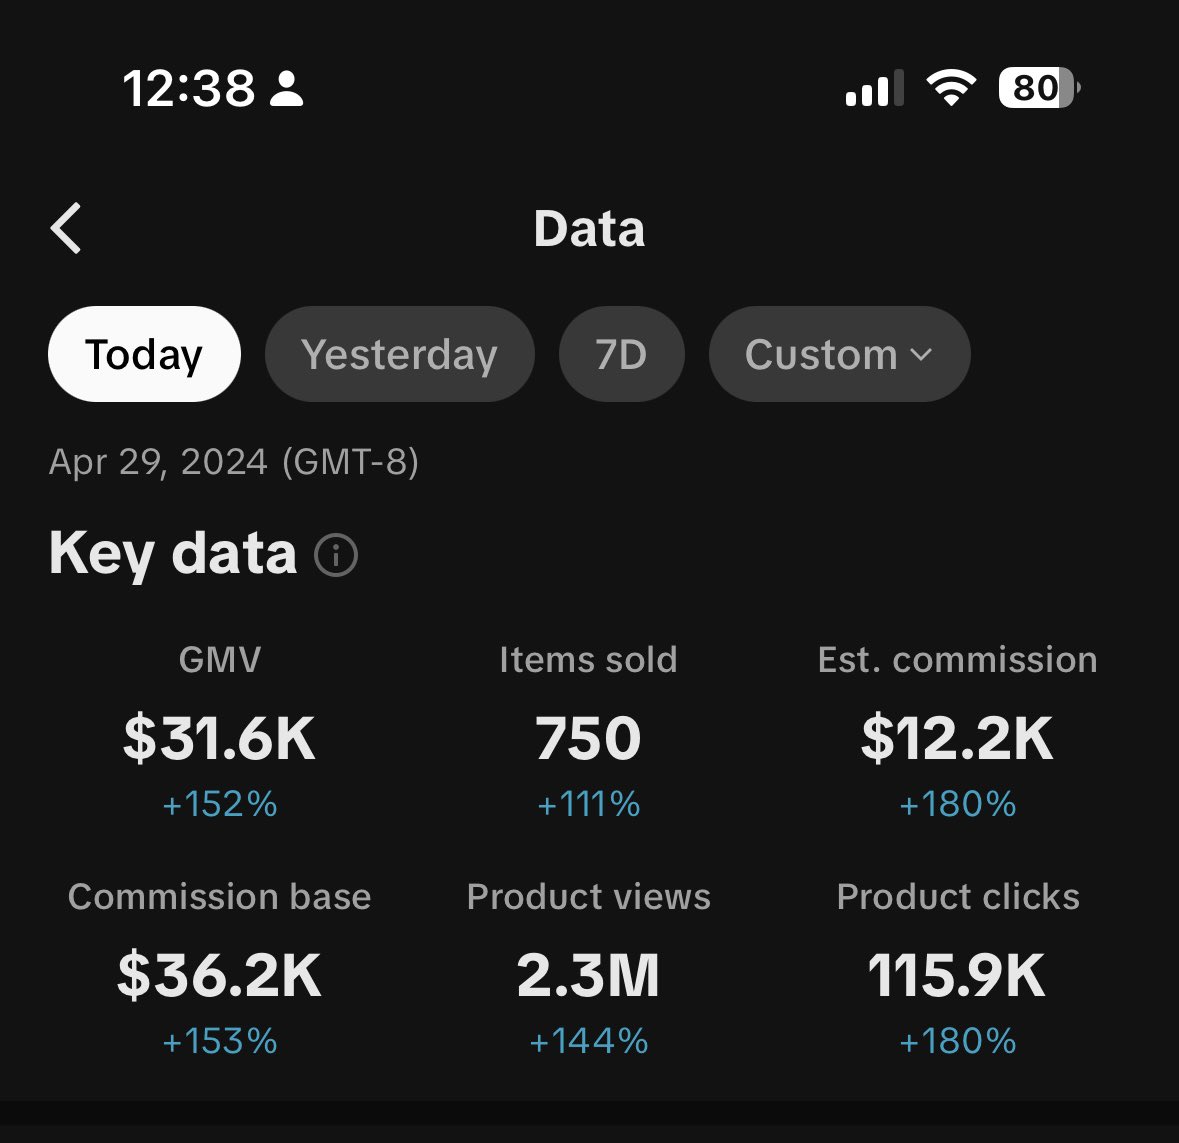 Tiktok Affiliate made me $12.2k PROFIT in ONE day… not revenue. This is my highest day to date!

The power of journaling, praying, and ACTUALIZING is crazy.